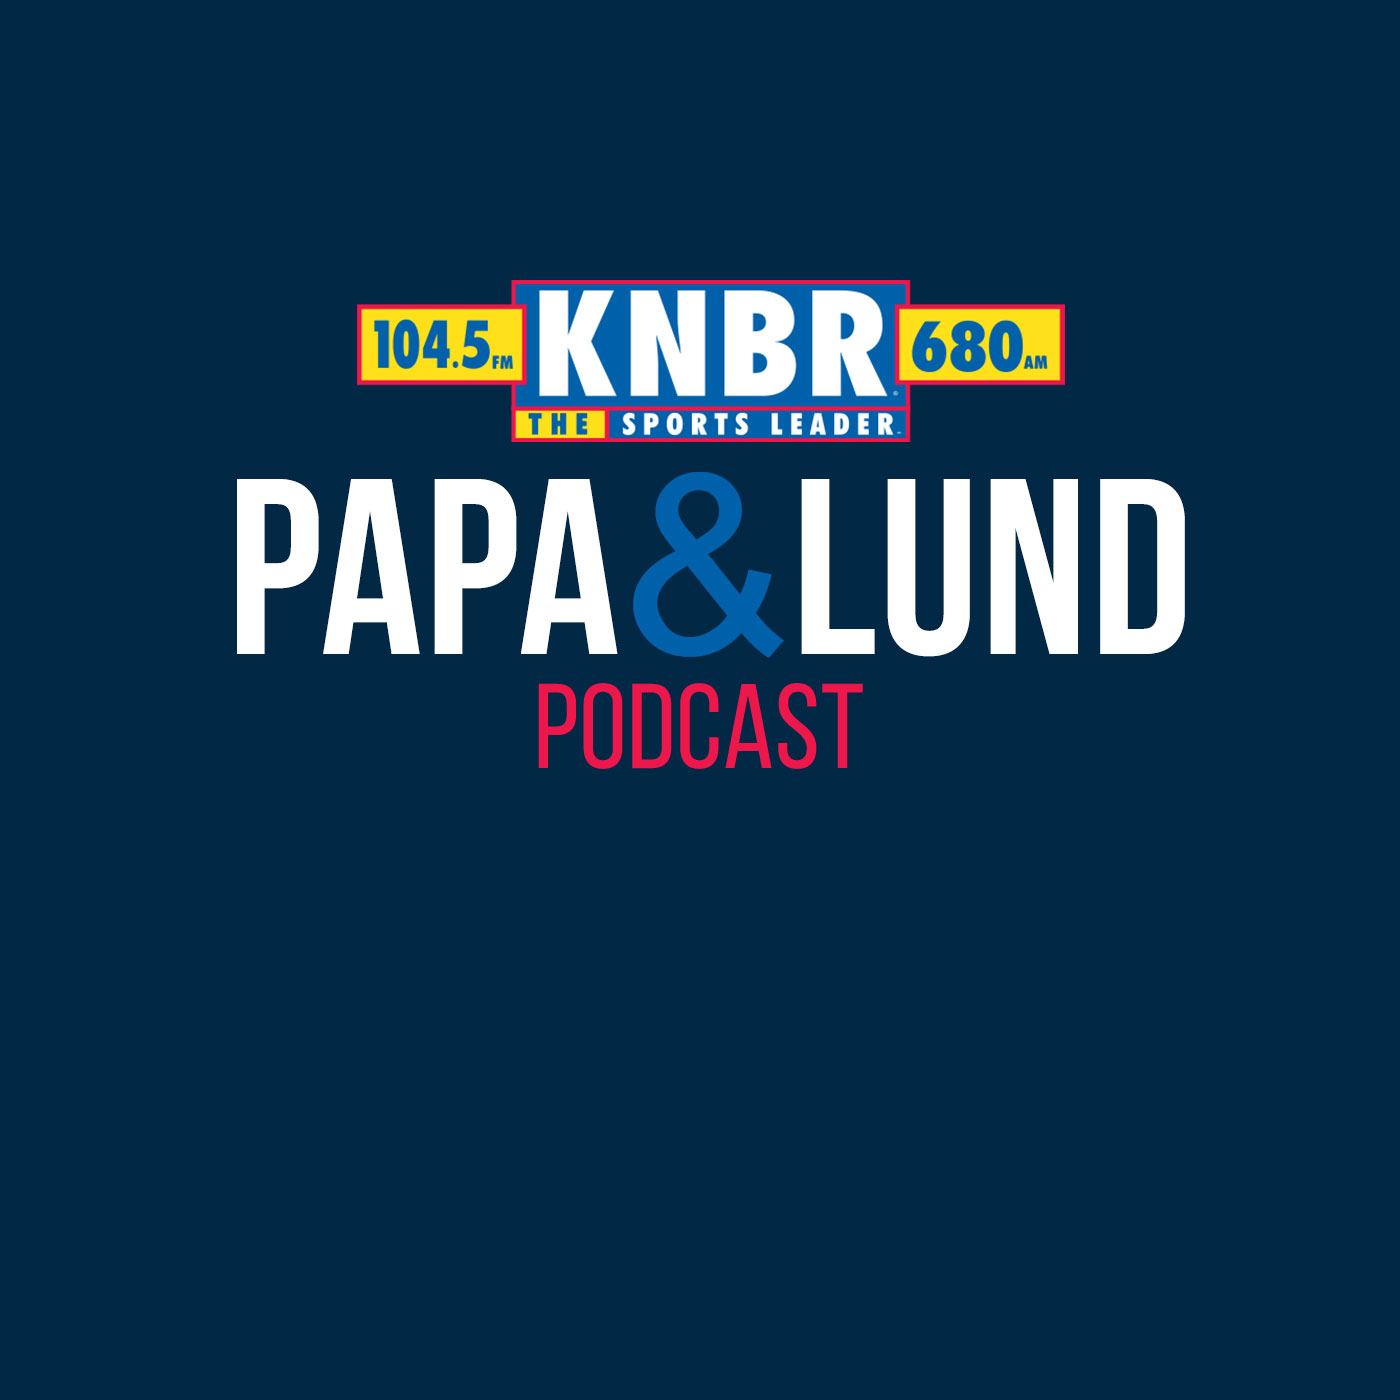 4-24 Marc Spears joins Papa and Lund to discuss the breaking news of De'aaron Fox's injury and what it means for the series